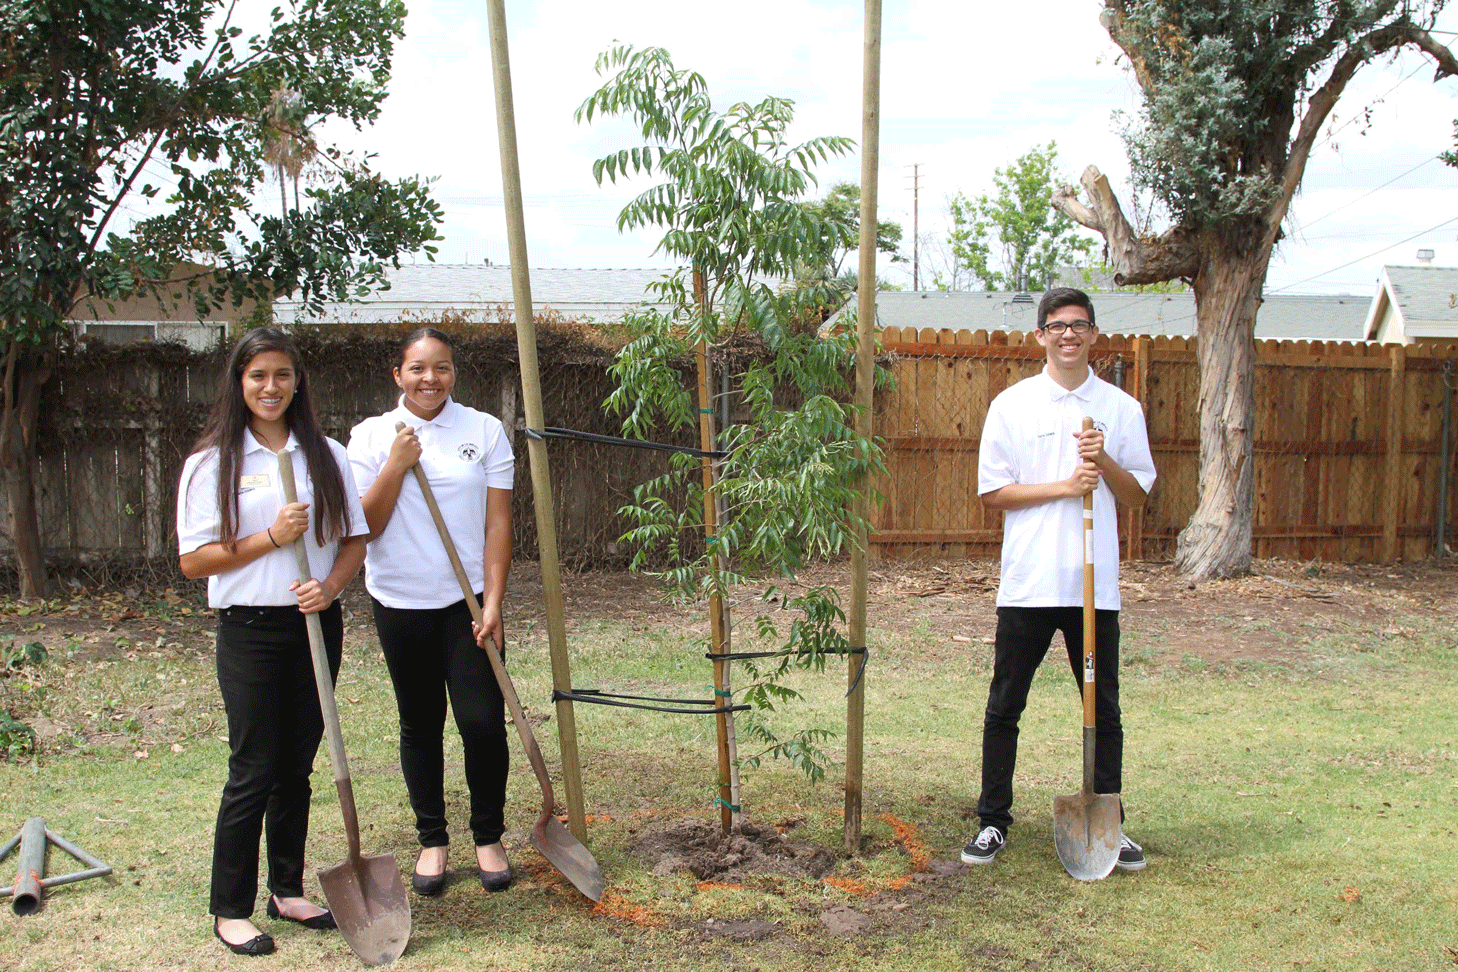 Members of La Mirada’s Youth Council plant a tree at Neff Park on April 30 in conjunction with the “Love La Mirada” day of service event. (left to right: Adriana Perez, Noemi Muñoz, and David Ramirez) 